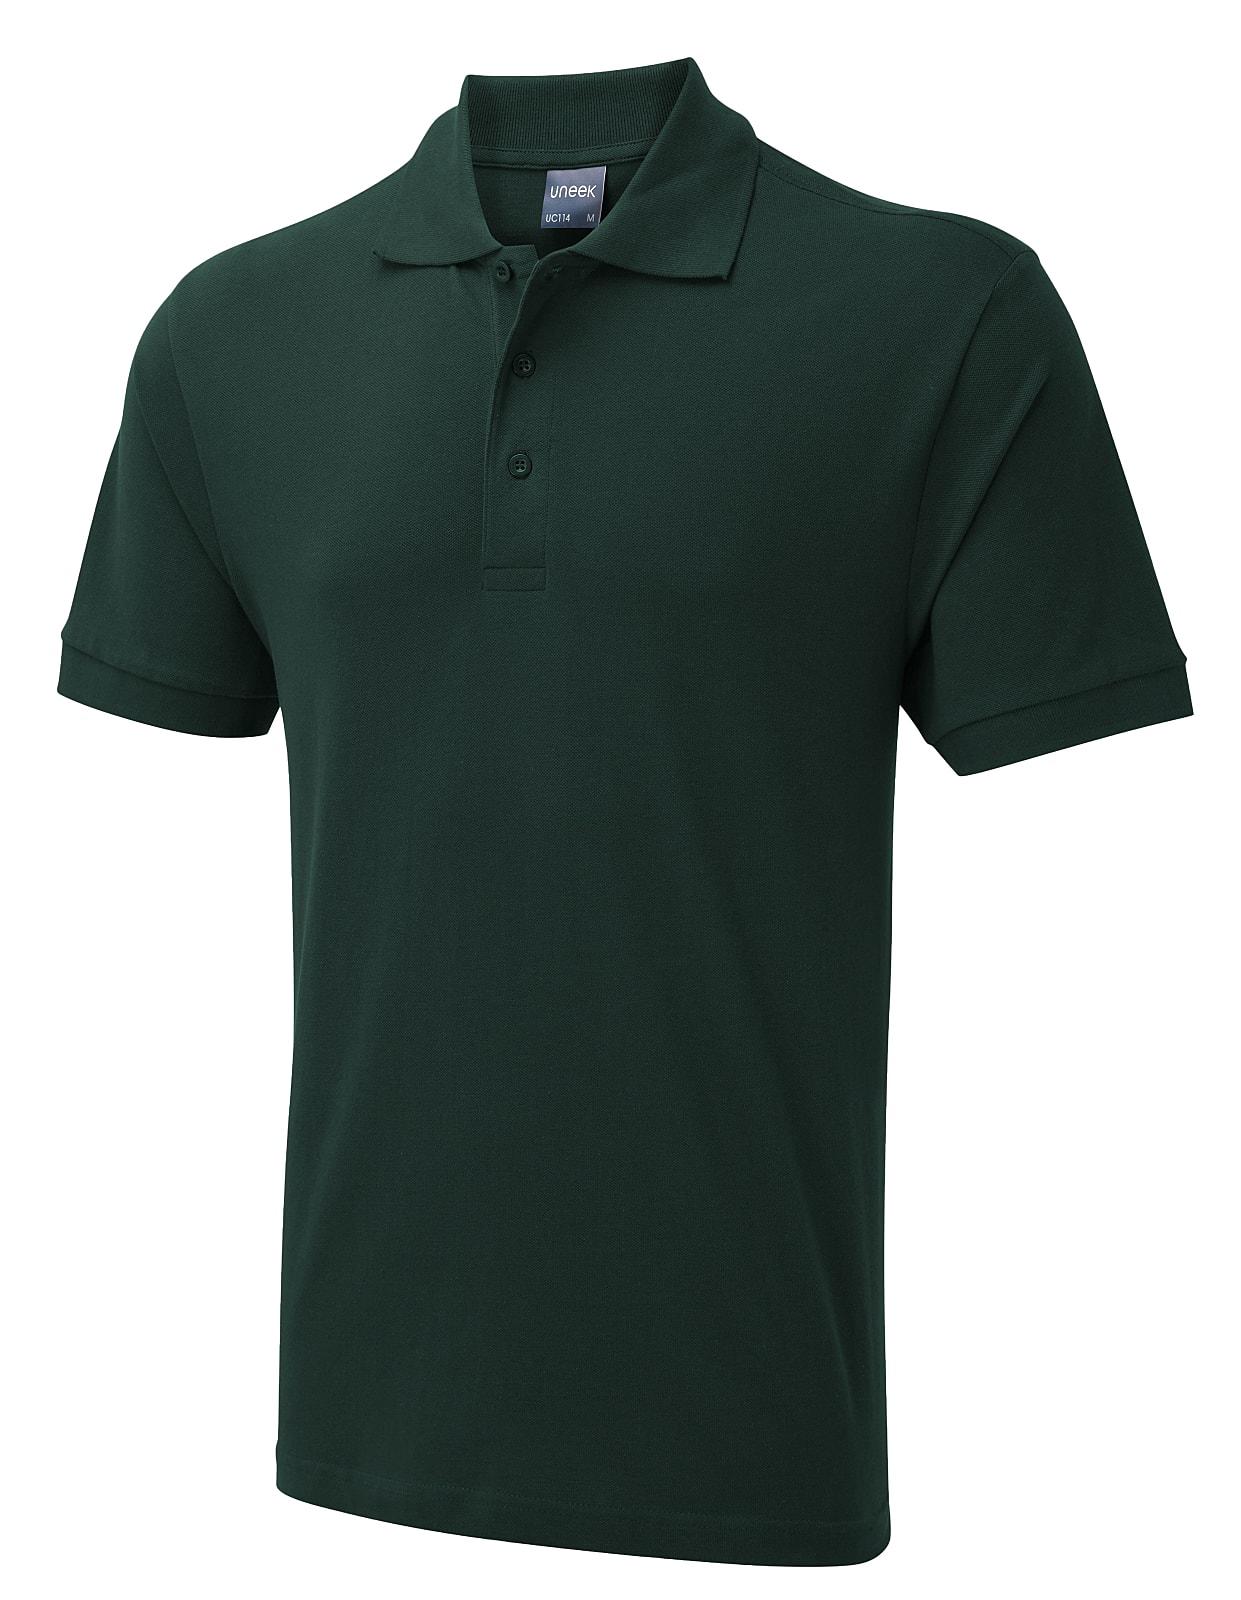 Uneek 180GSM Mens Polo Shirt in Bottle Green (Product Code: UC114)